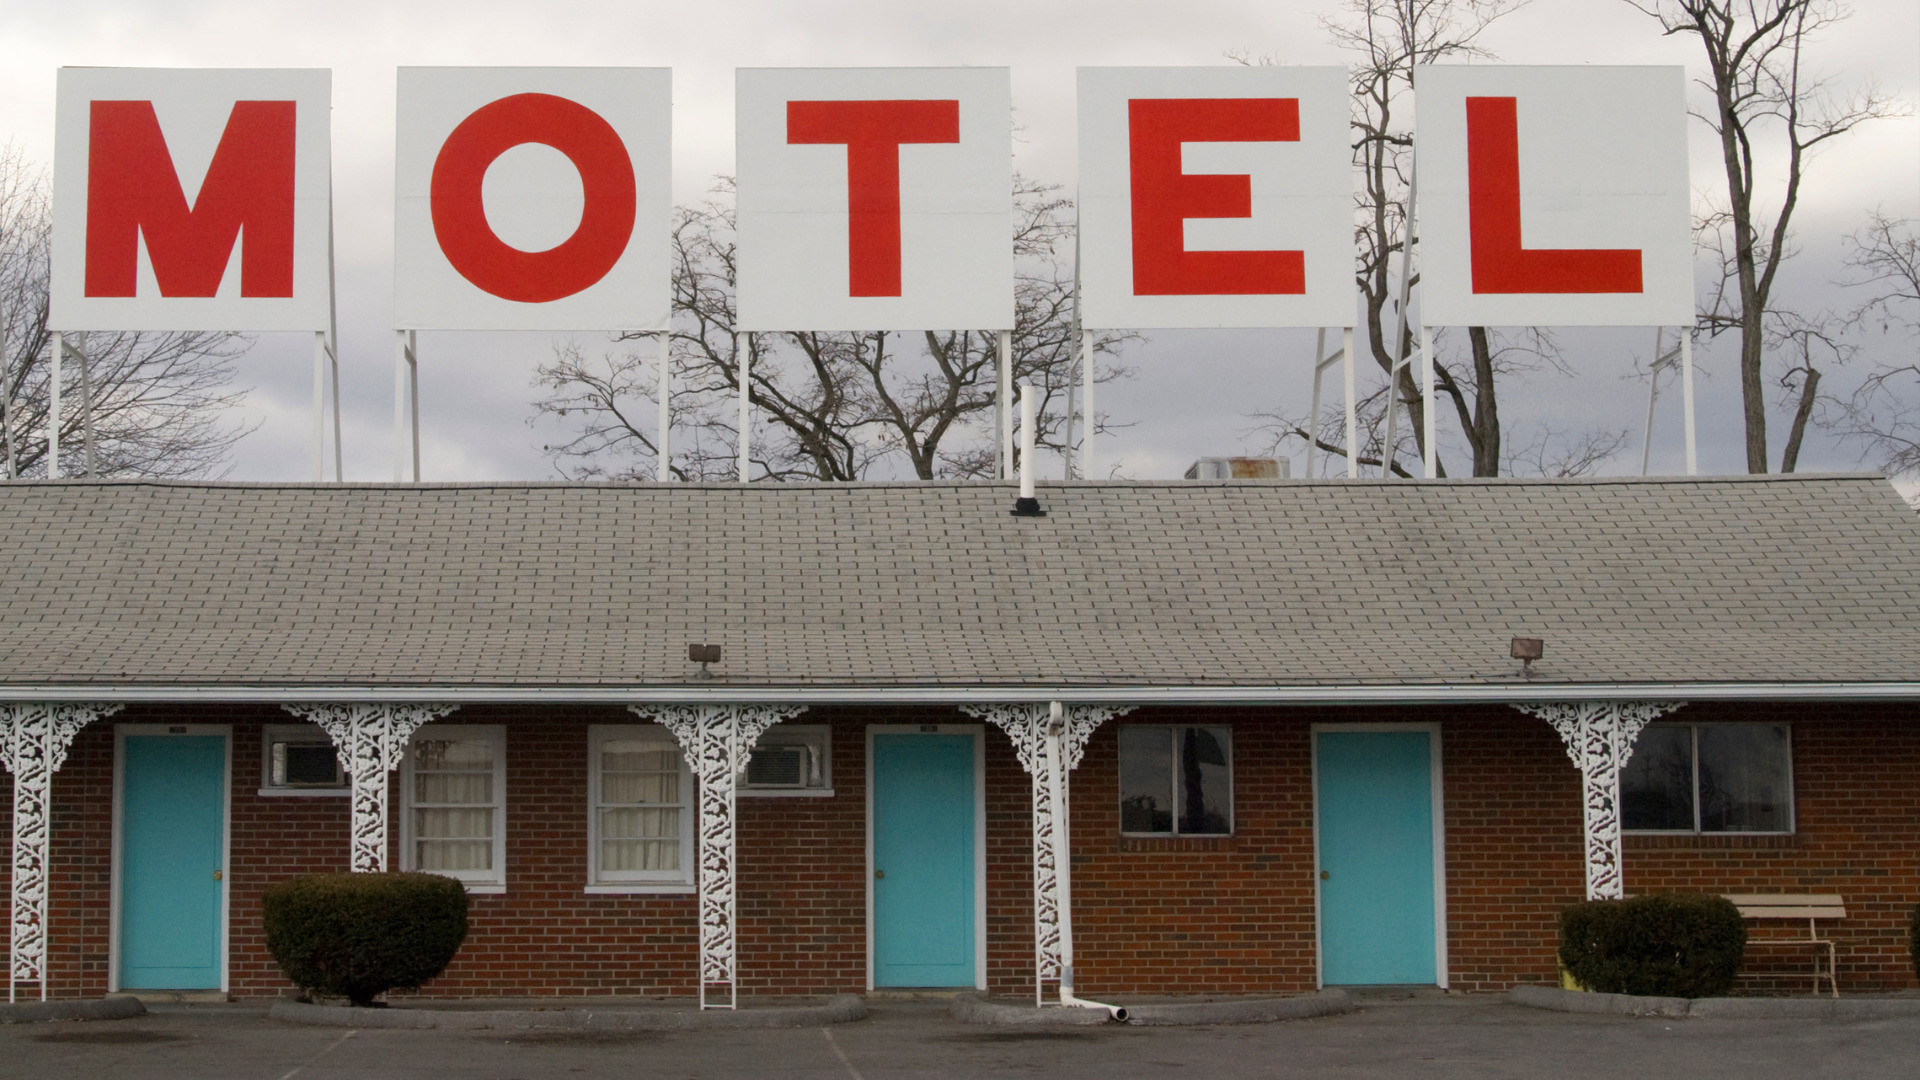 motel safety tips - Tips for Keeping Your Motel Safe and Secure